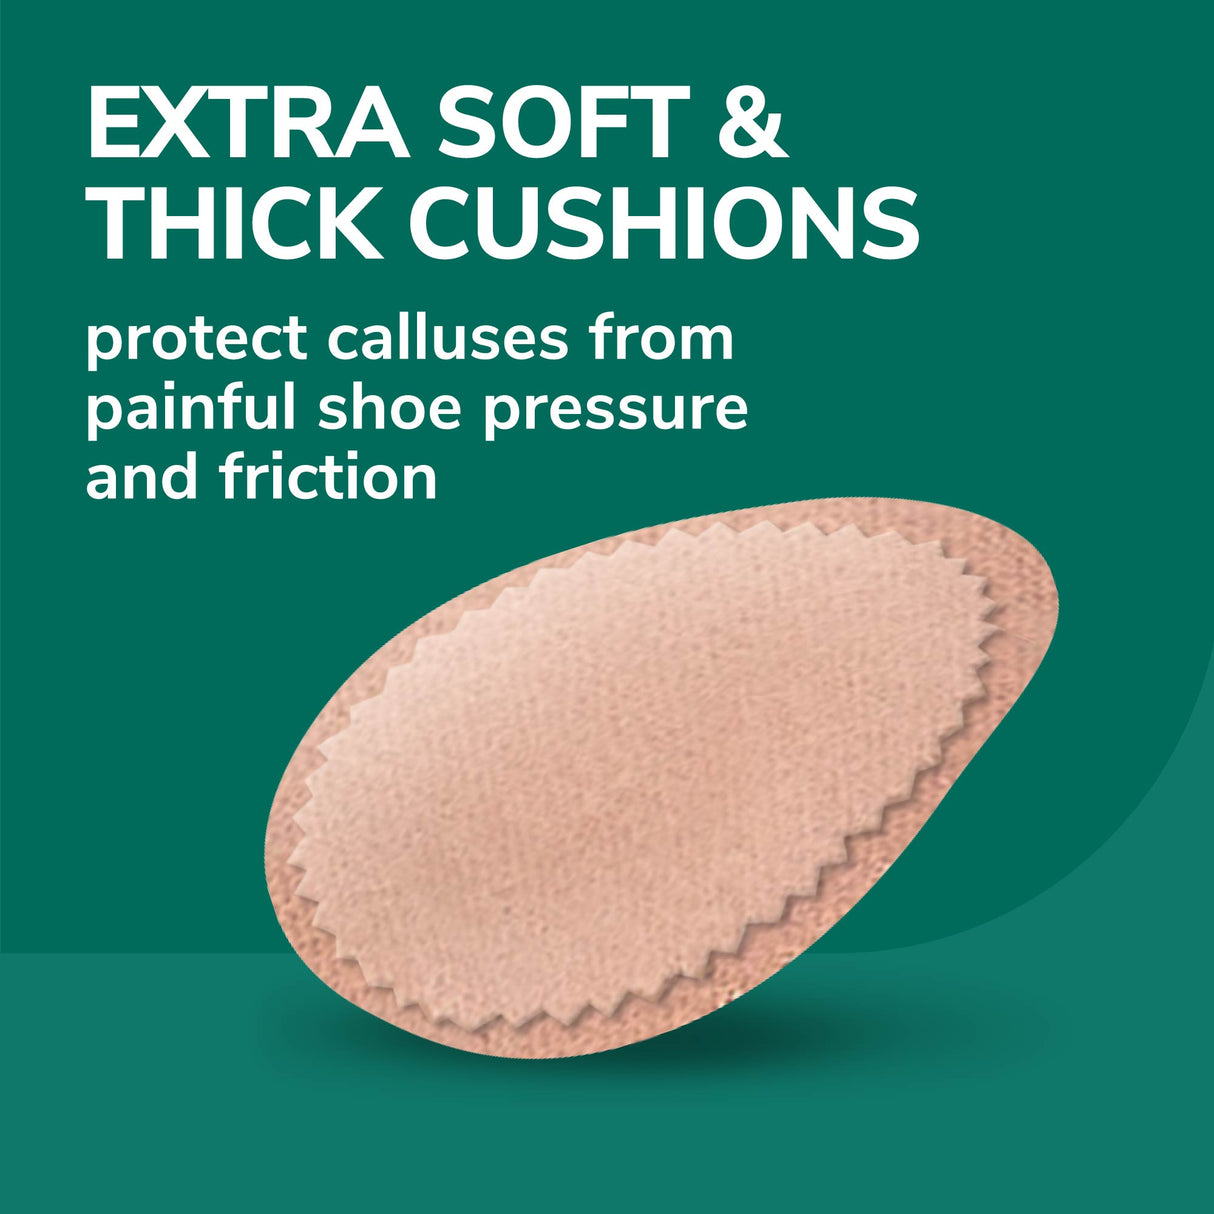 image of extra soft and thick cushions protect calluses from painful shoe pressure and friction